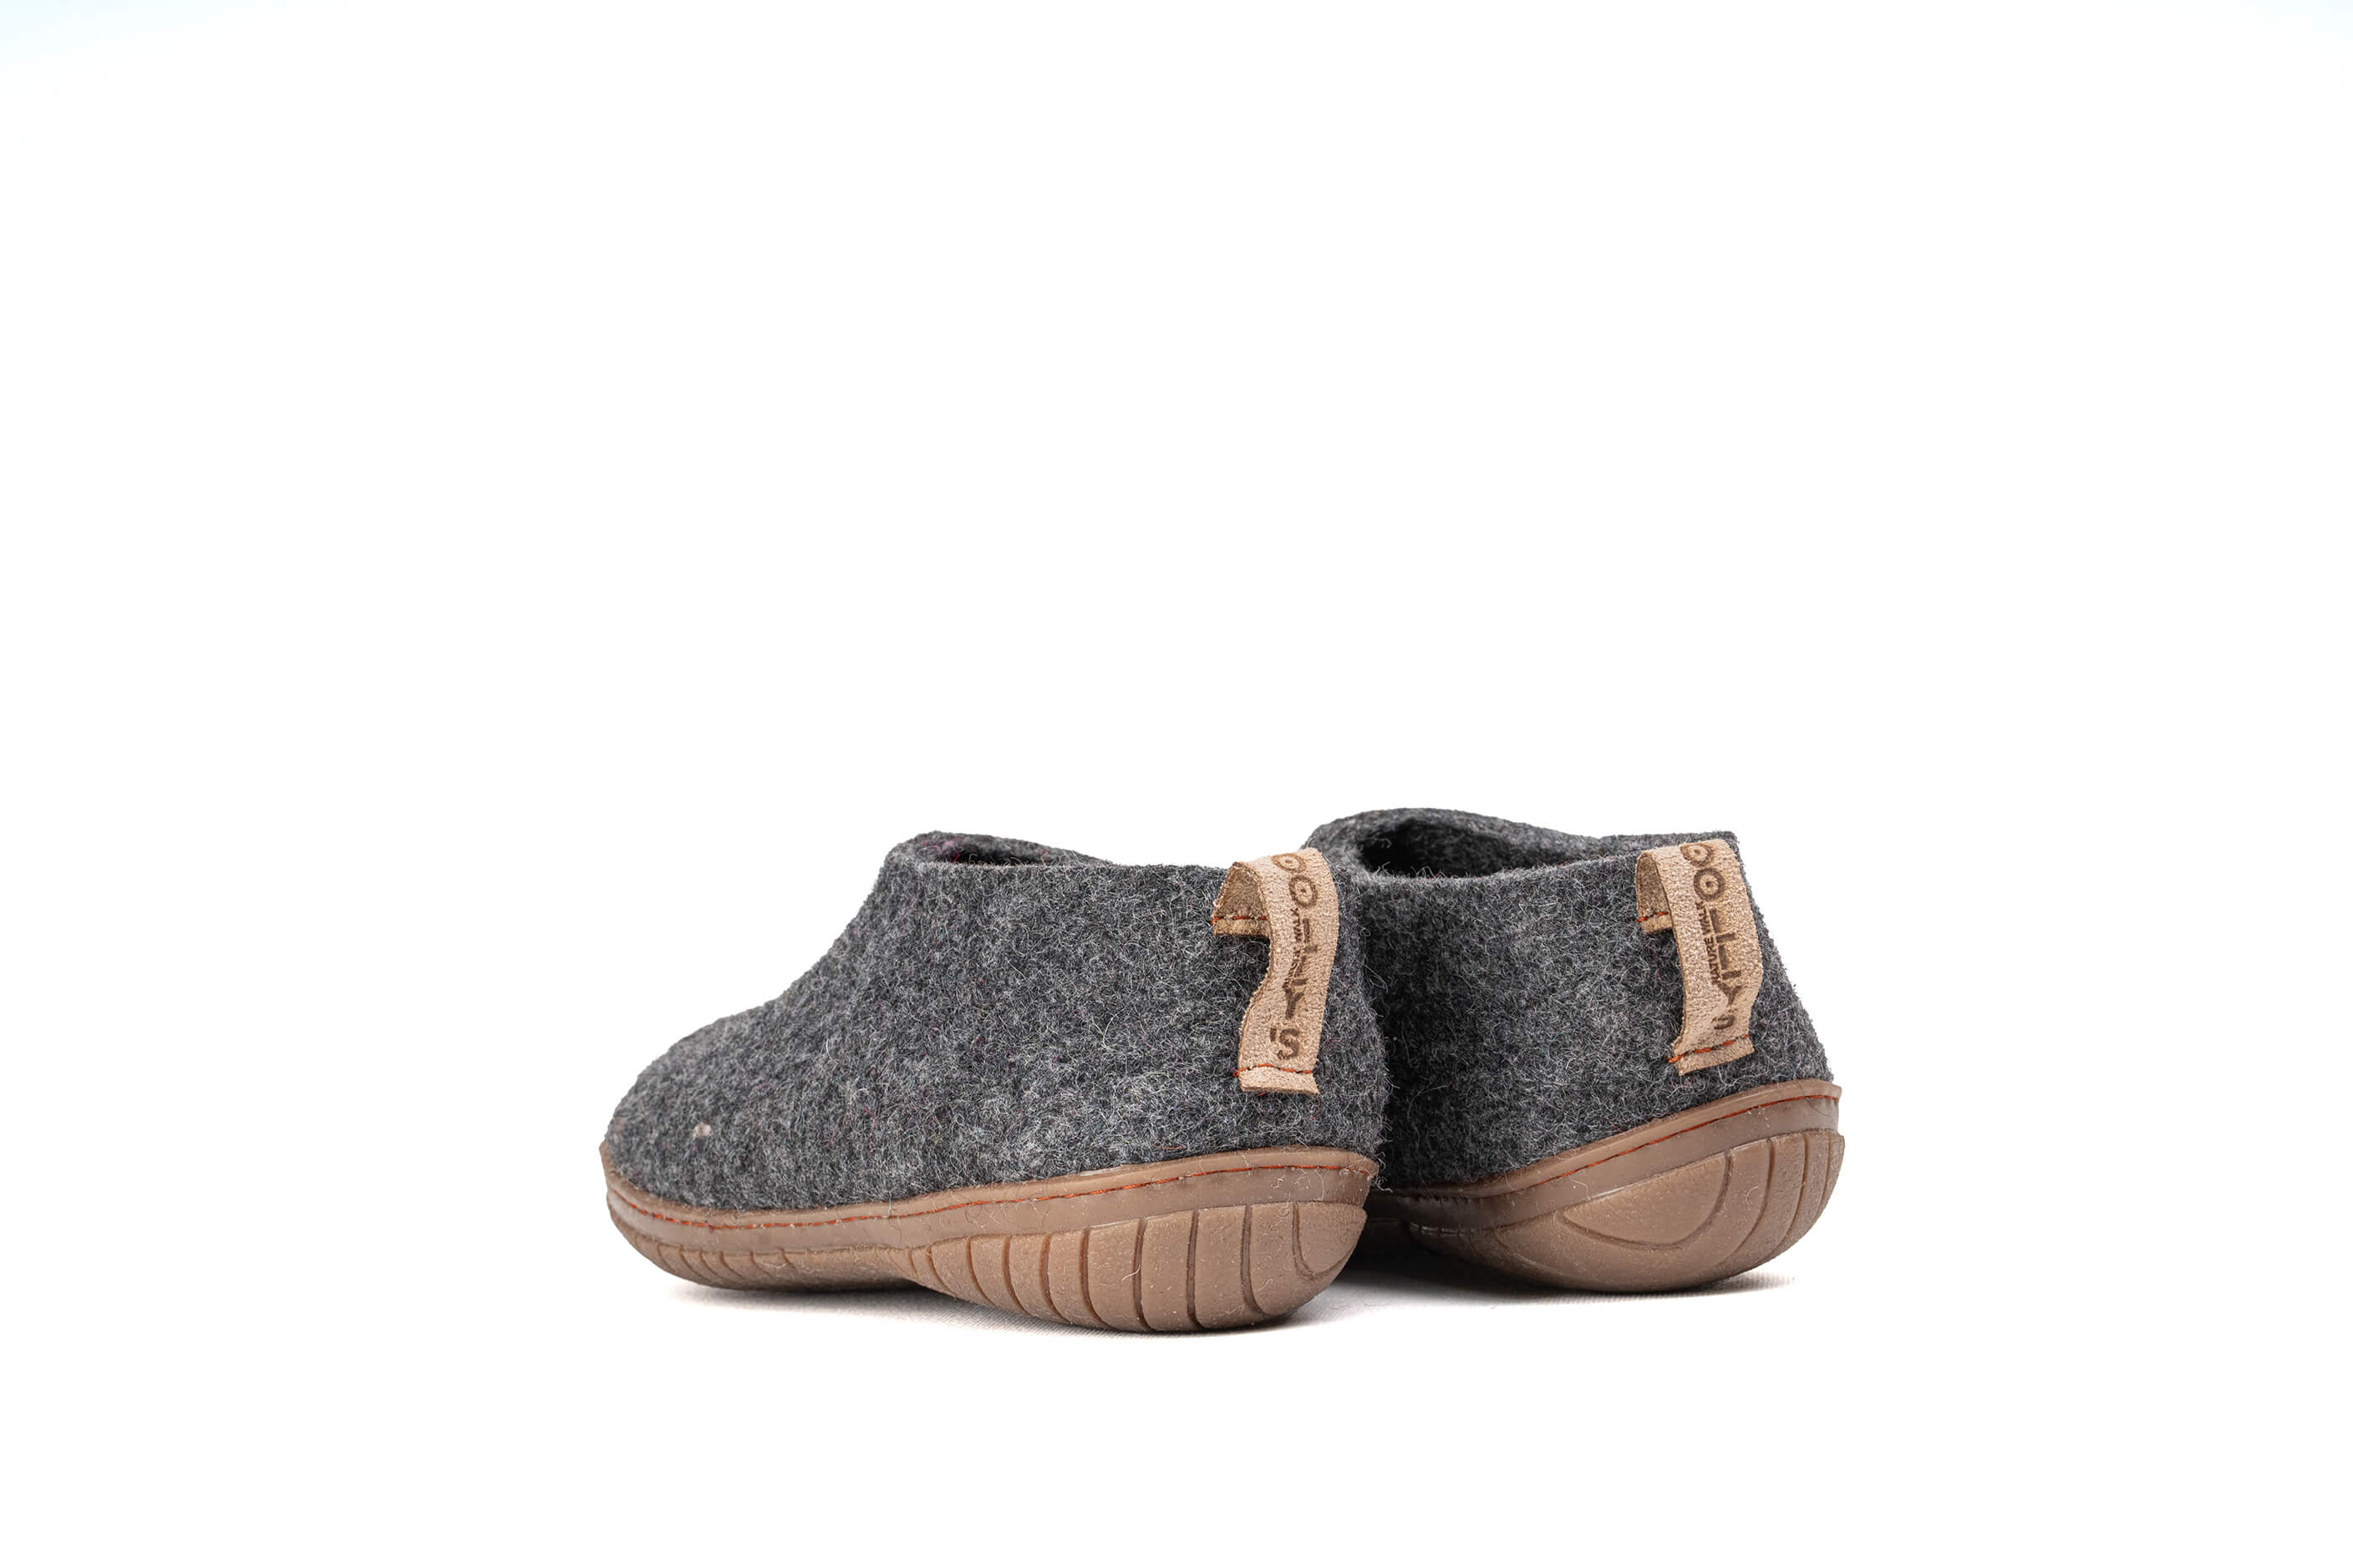 Outdoor Shoes With Rubber Sole - Charcoal